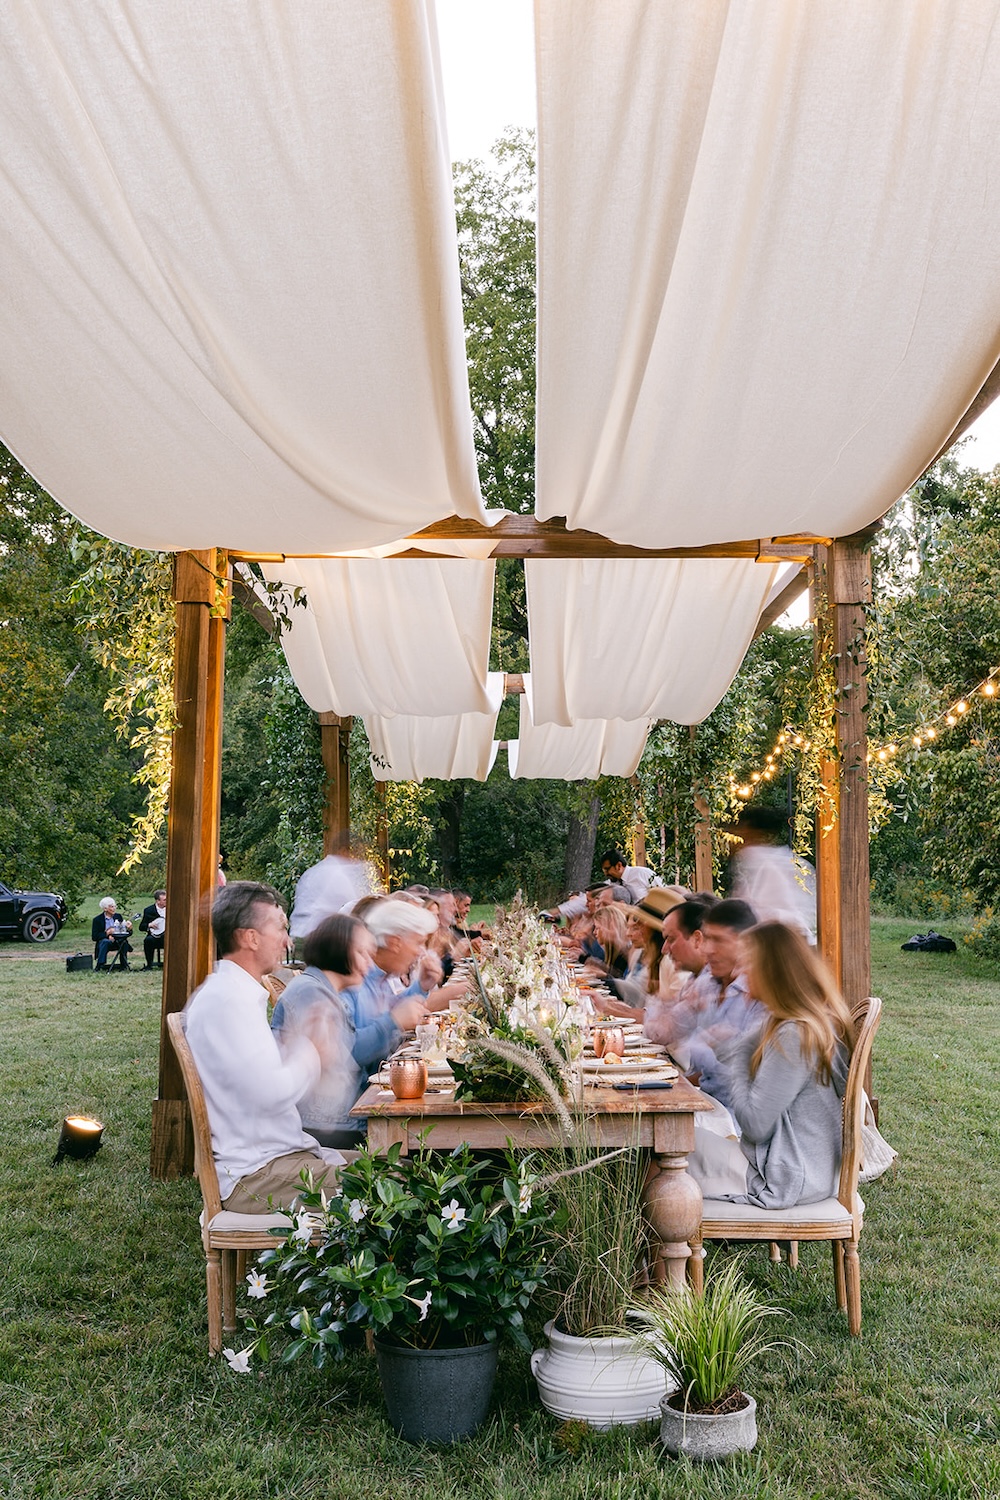 Alfresco dinner at farmhouse tables under rustic chic tent. Milestone birthday party celebration weekend in Middleburg, Virginia. Sarah Bradshaw Photography.